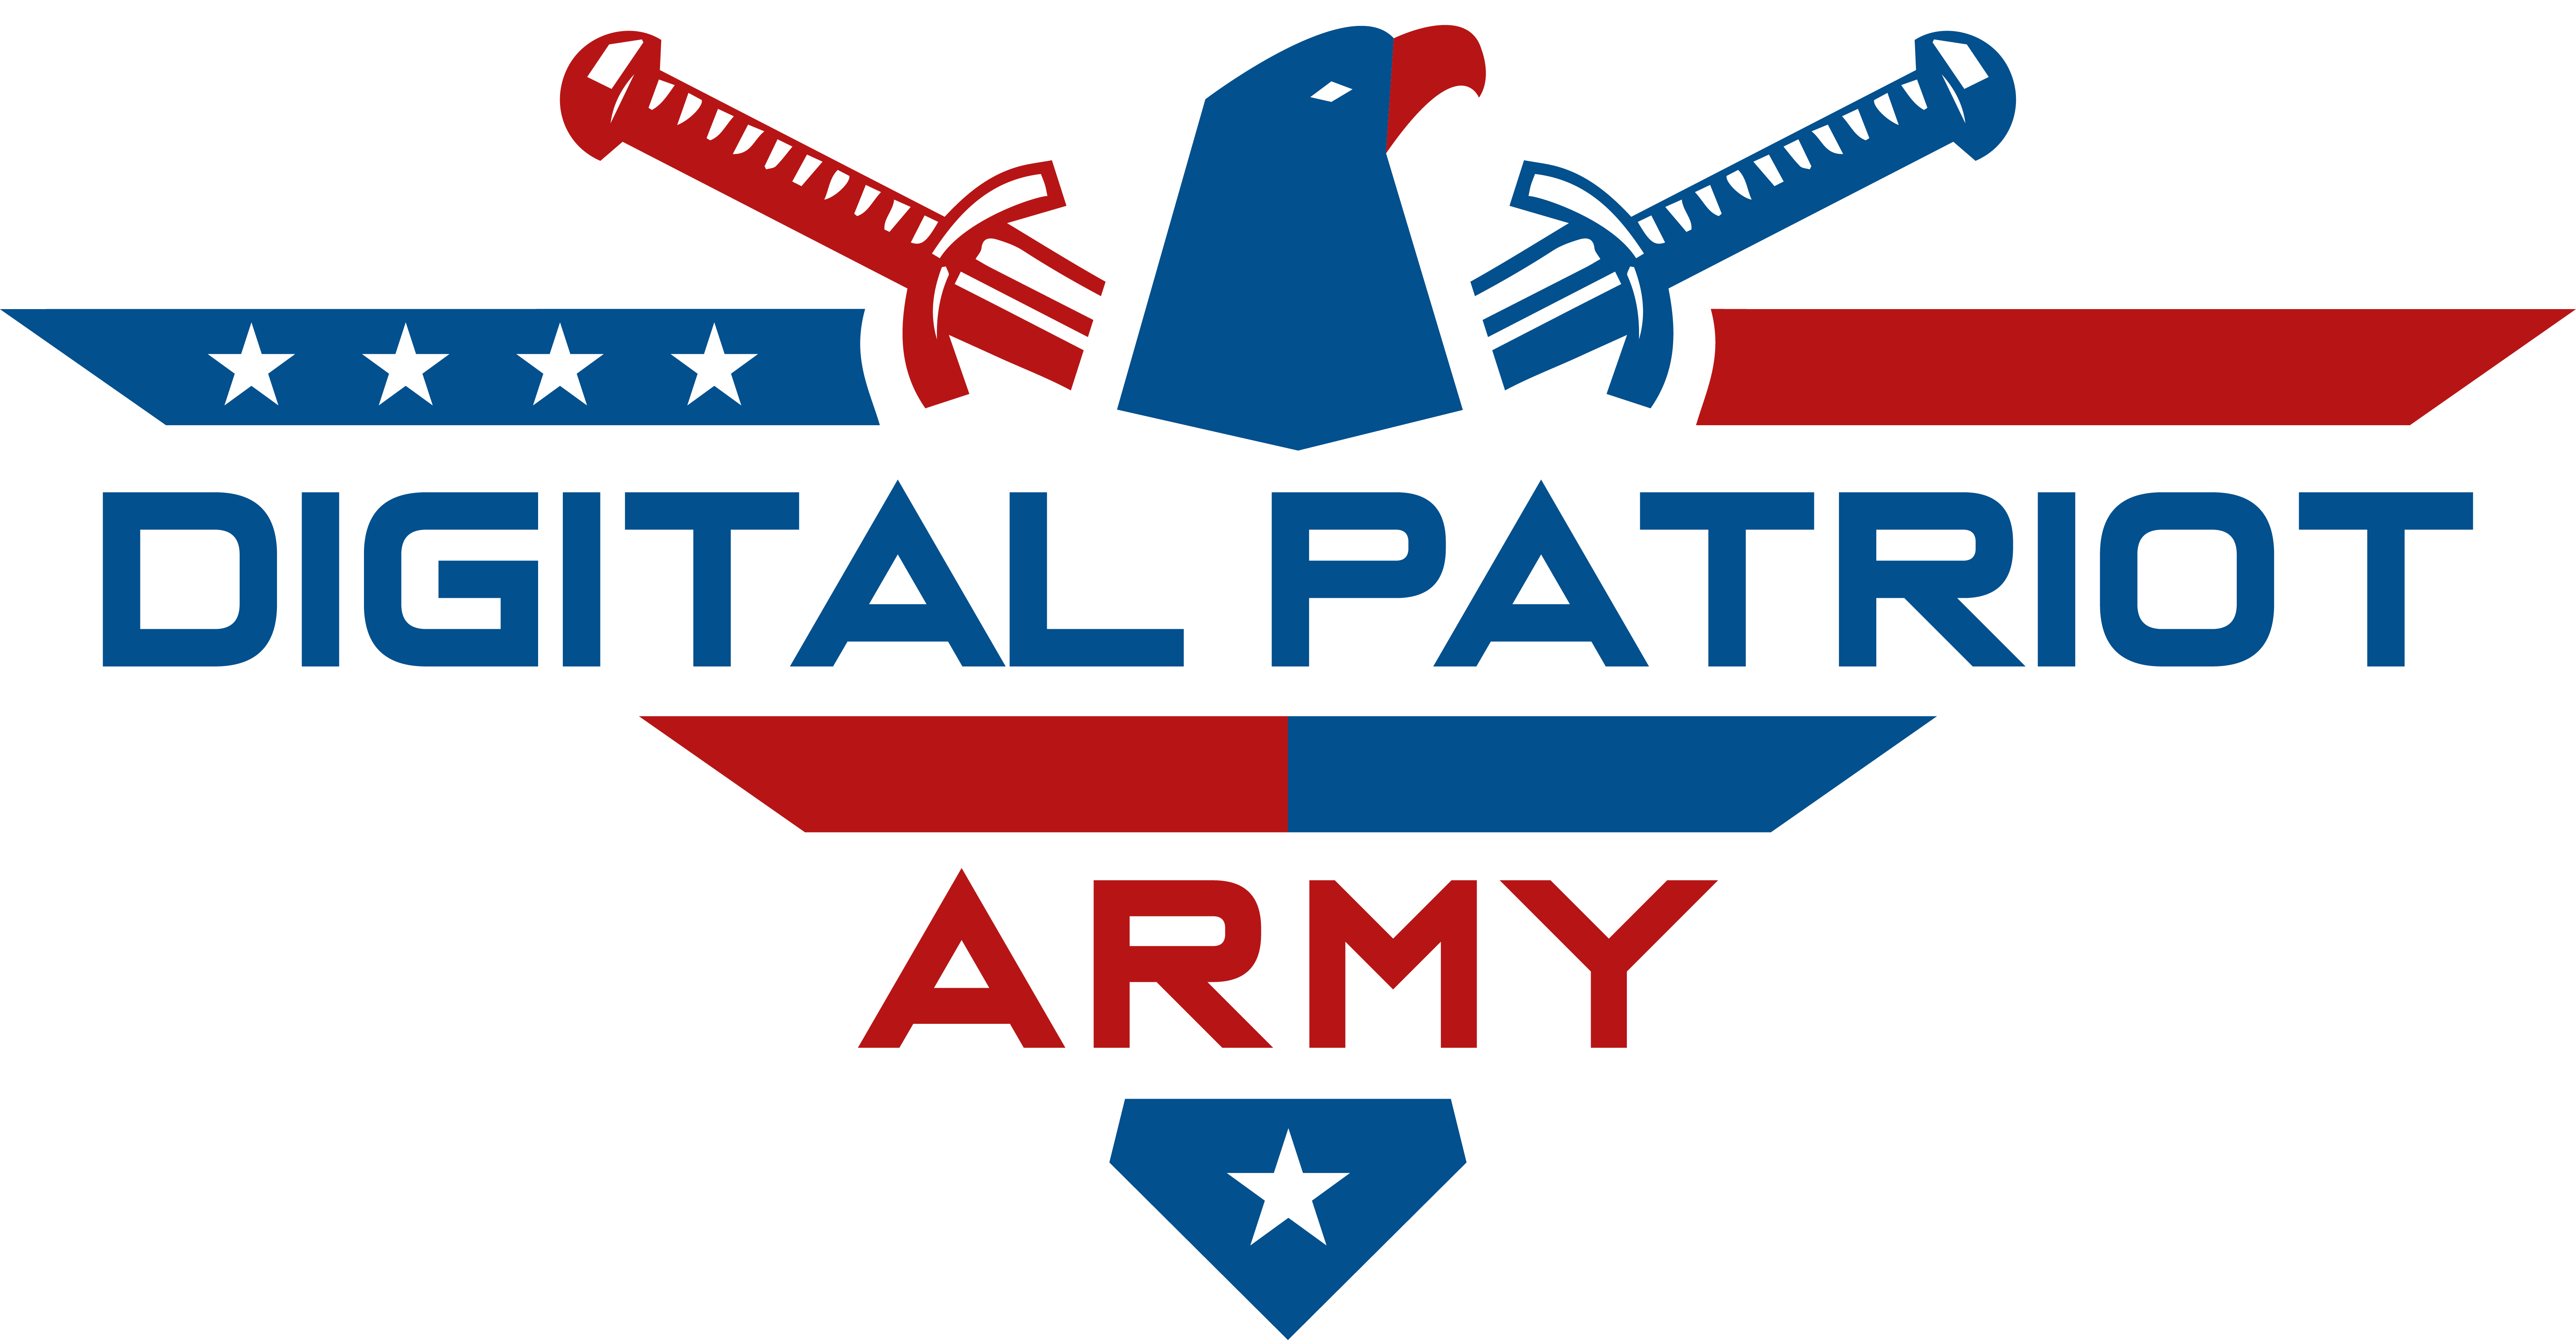 About - Digital Patriot Army